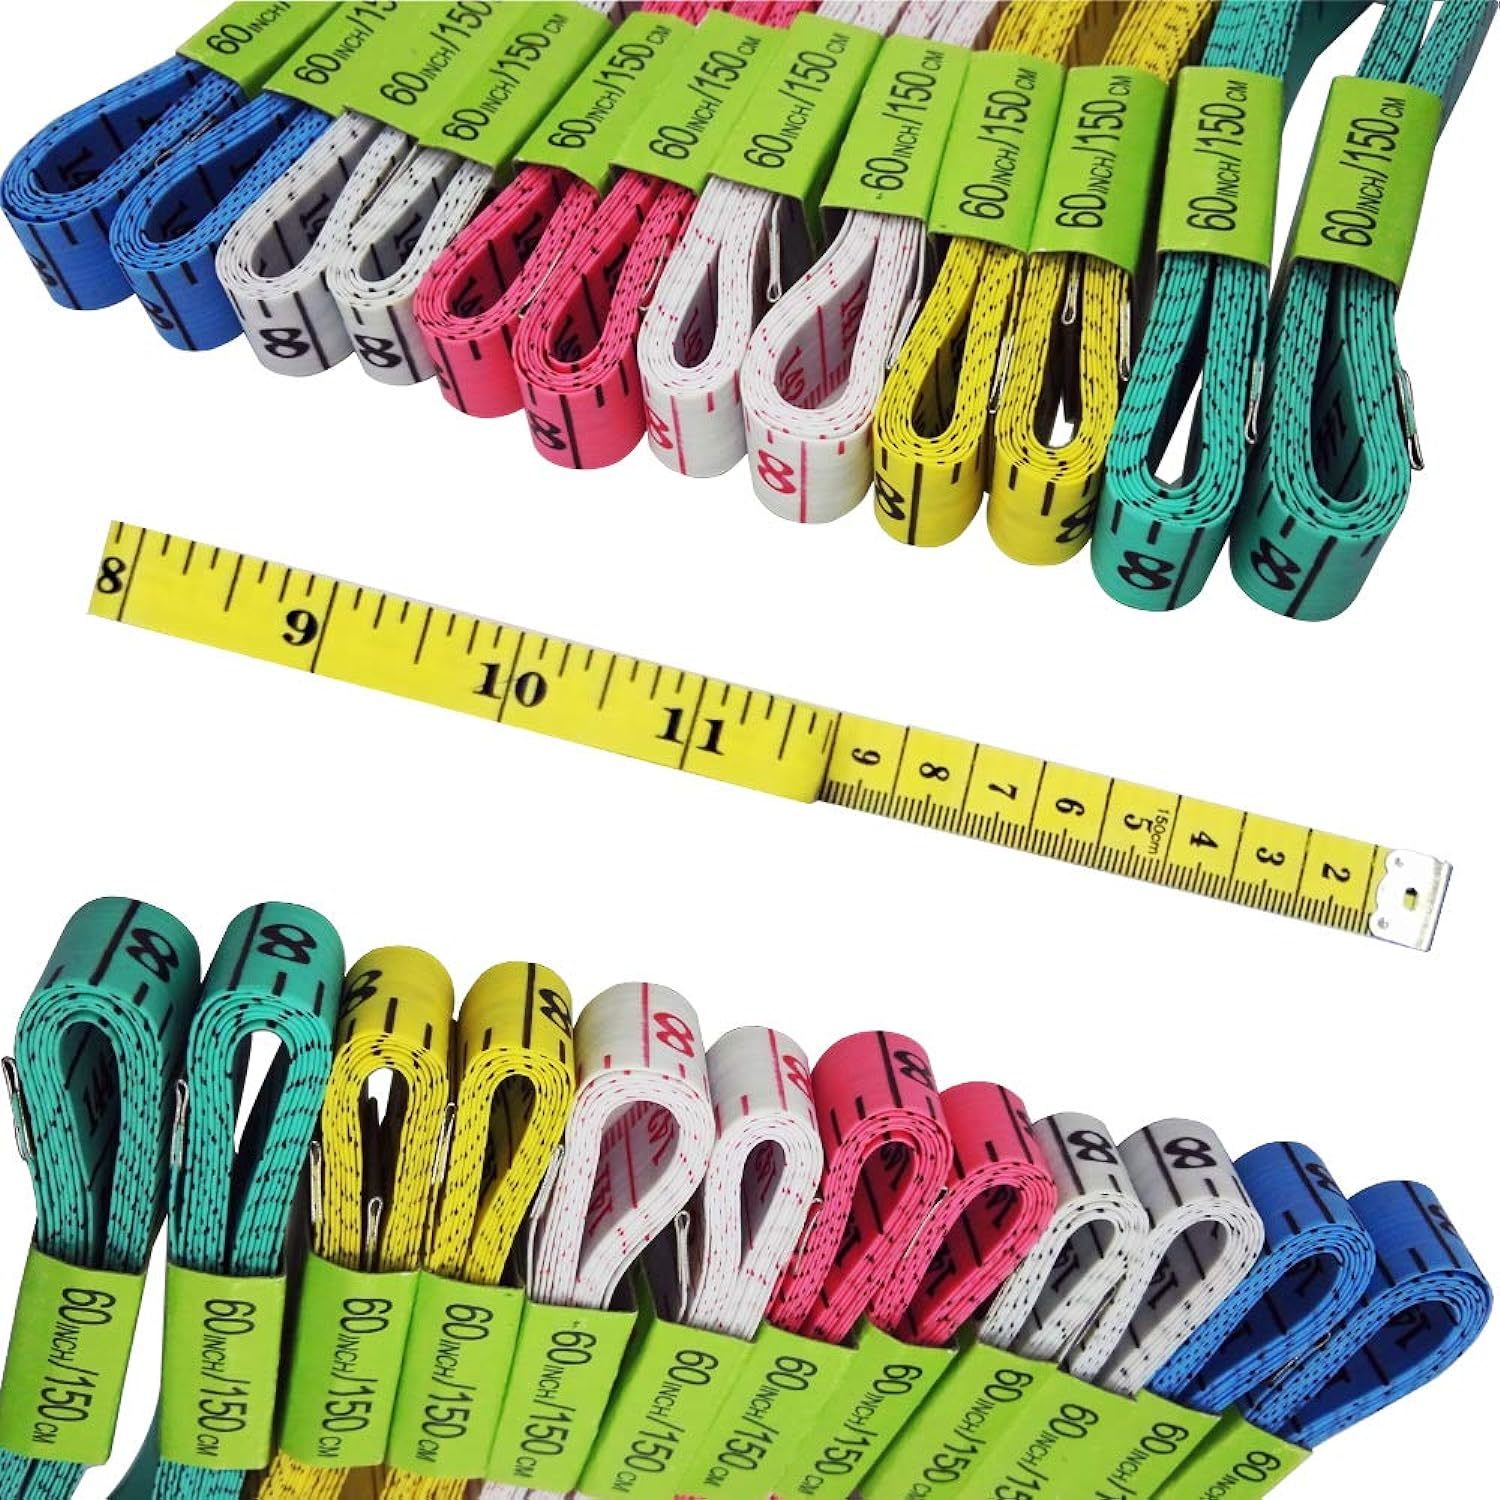 4 Pack Soft Tape Measure Double Scale 60-inch/150cm,Fabric Craft Tape  Measure & Medical Body Measurement,Sewing Flexible Vinyl Ruler & Measuring  Tape